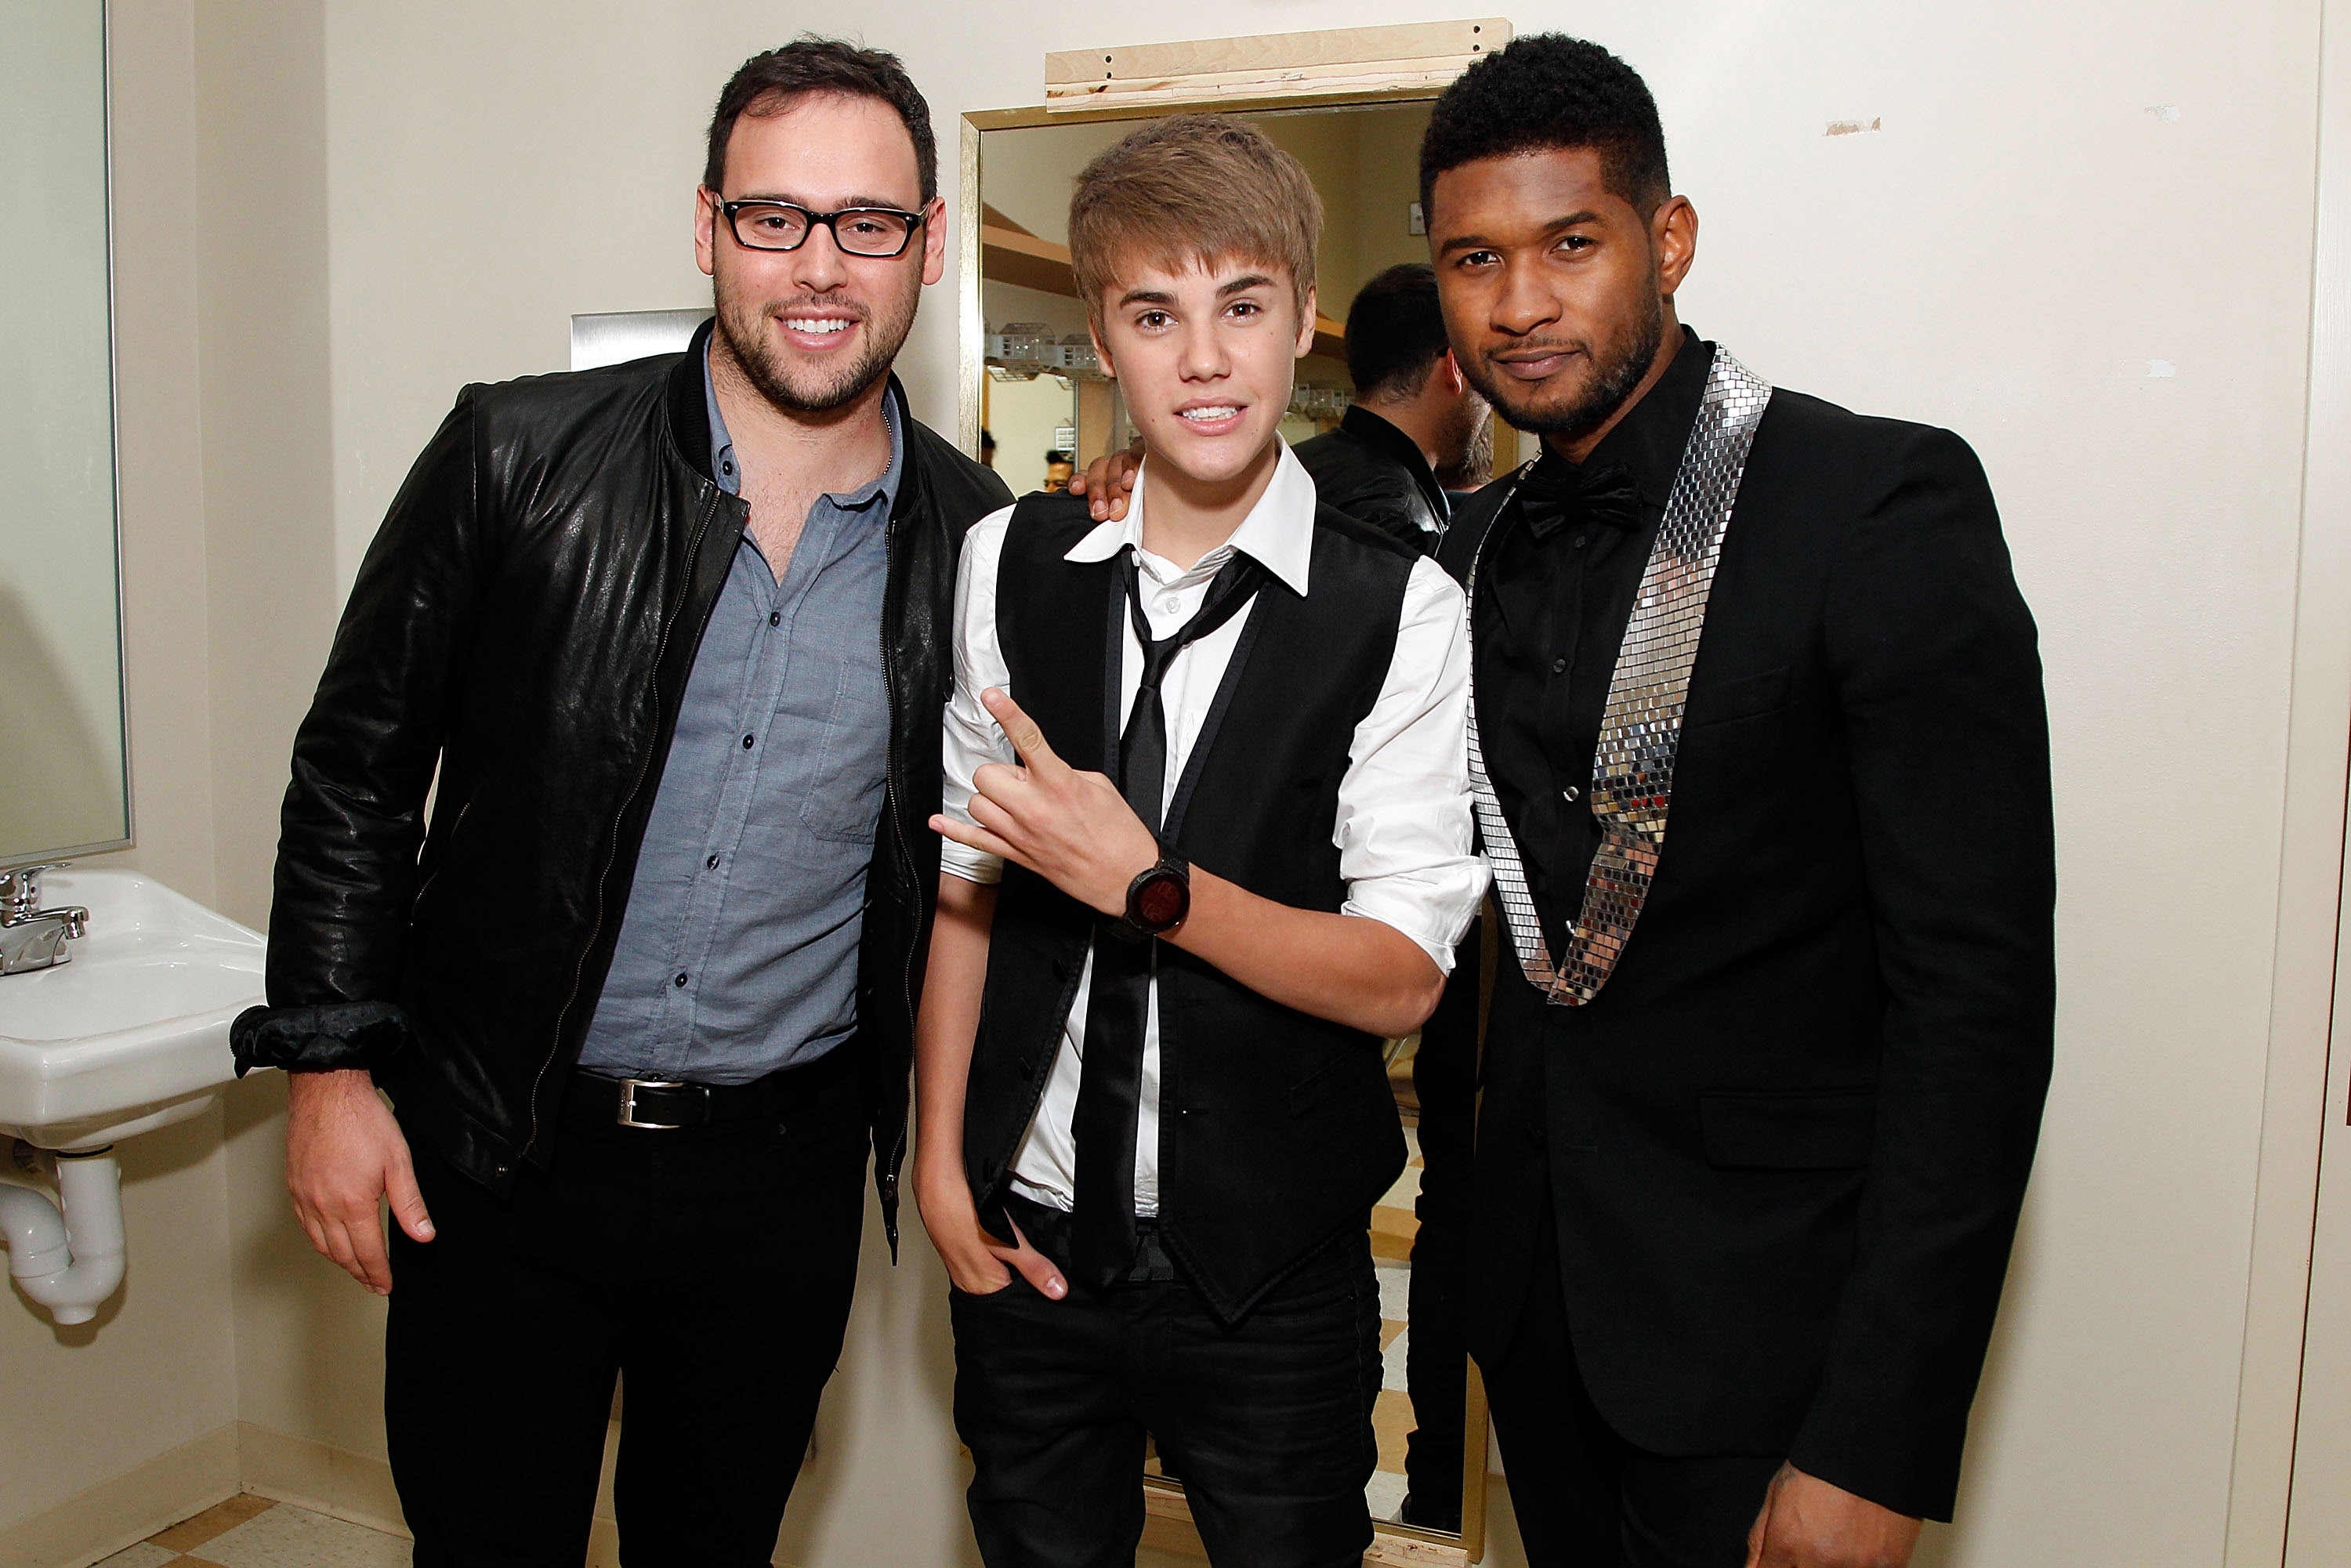 justin standing between scooter and usher in what looks to be a  public bathroom